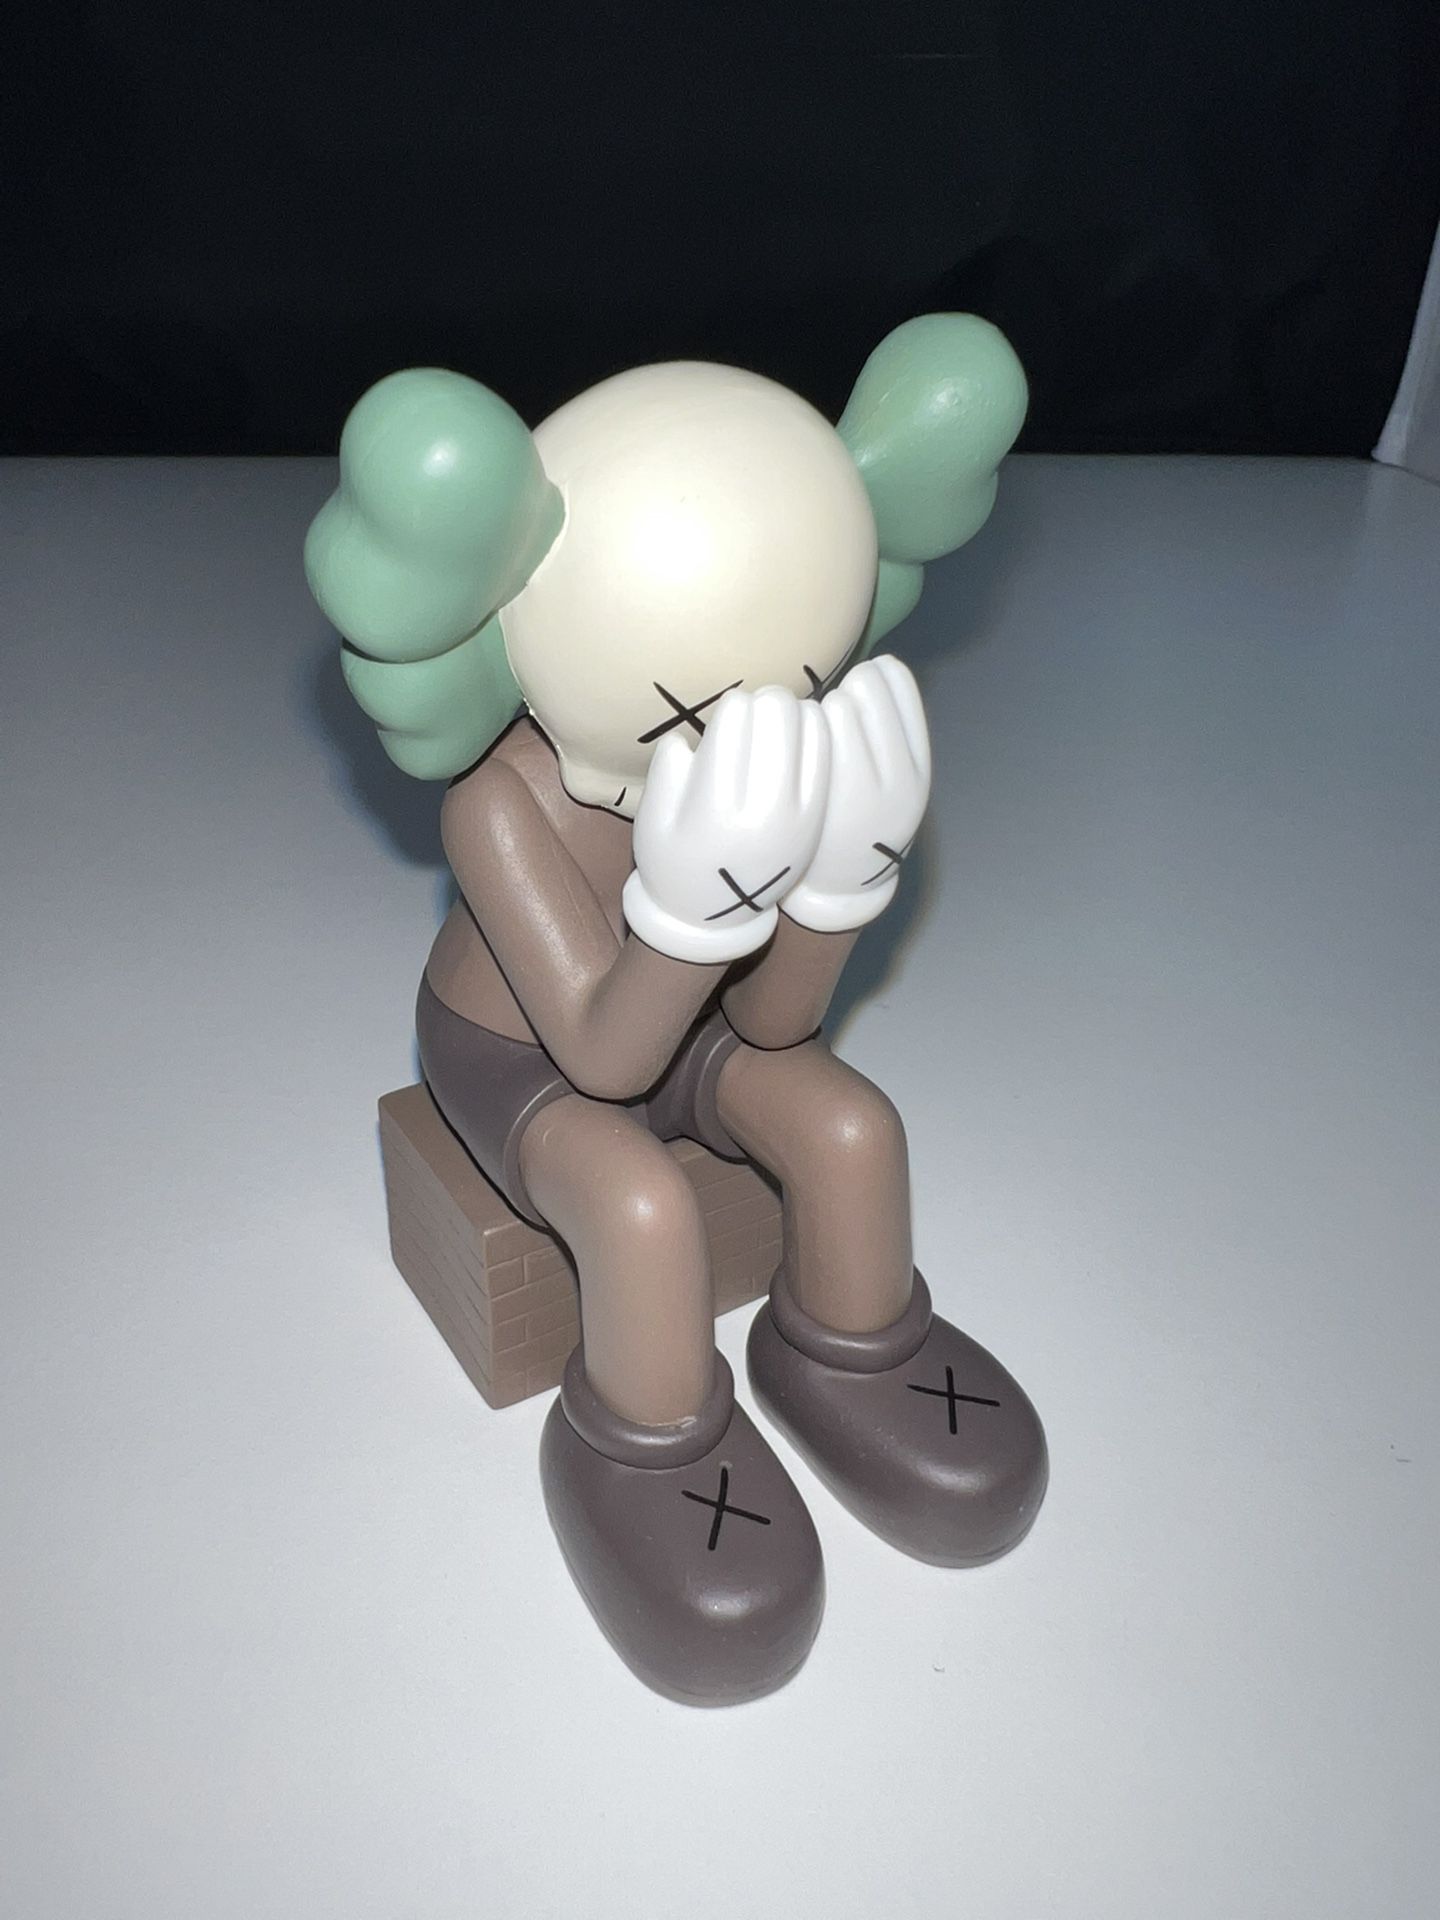 KAWS Inspired Sculpture Bear Figure Collectibles Building Blocks Sitting HAND in Face Decoration, Model Toy Unique Gift Hypebeast - Brown W Green Ears